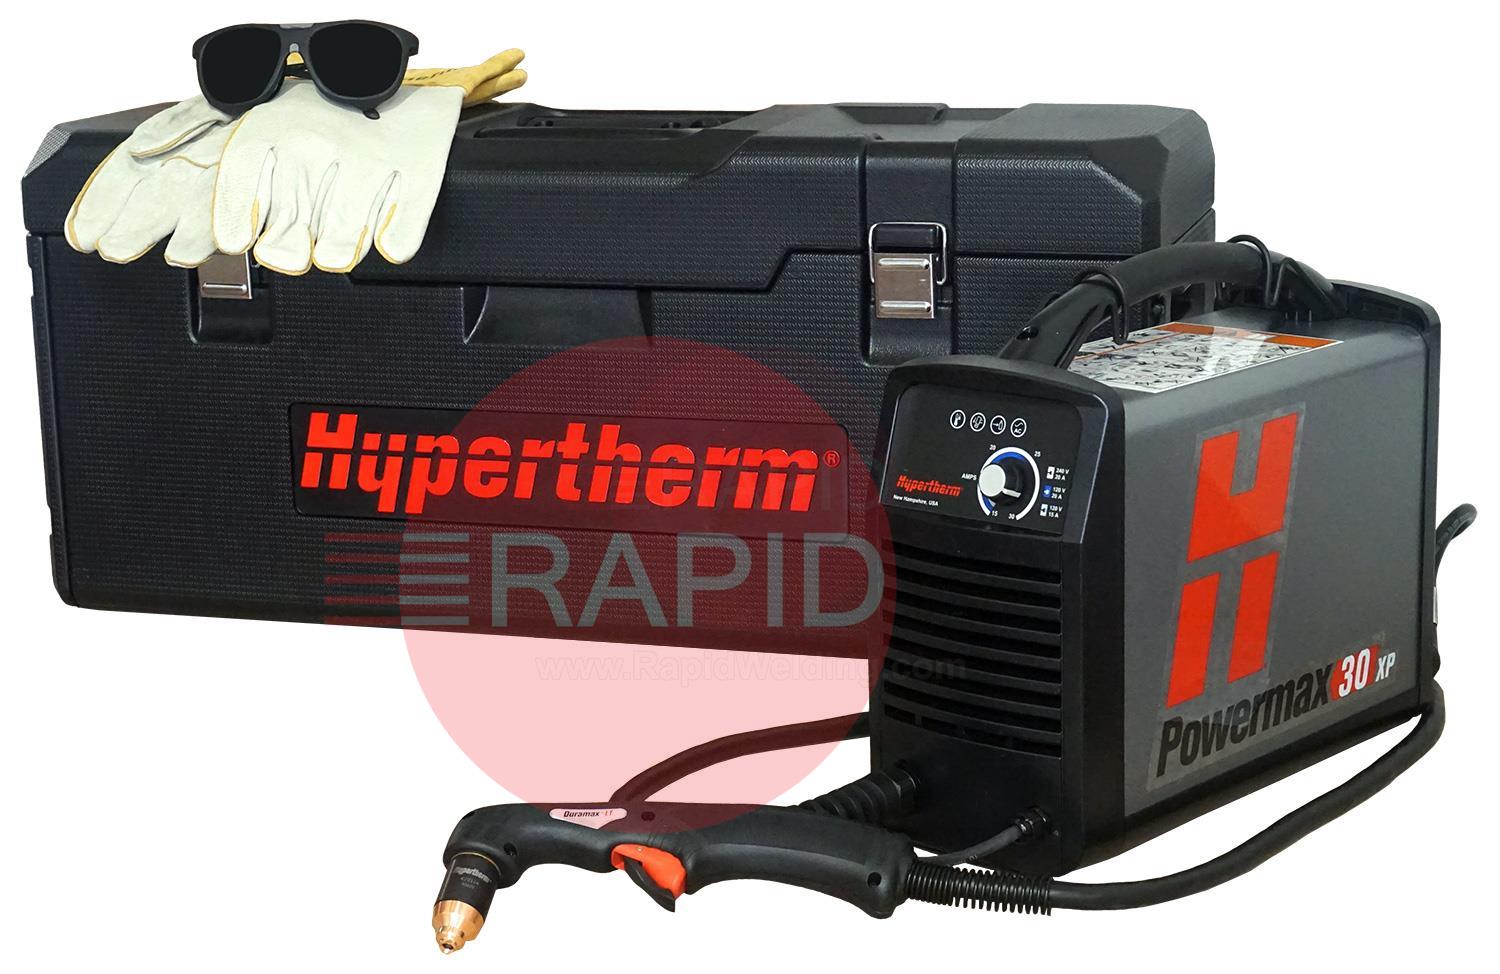 088083  Hypertherm Powermax 30 XP Plasma Cutter with 4.5m Torch & Case, Dual Voltage 110v & 240v CE